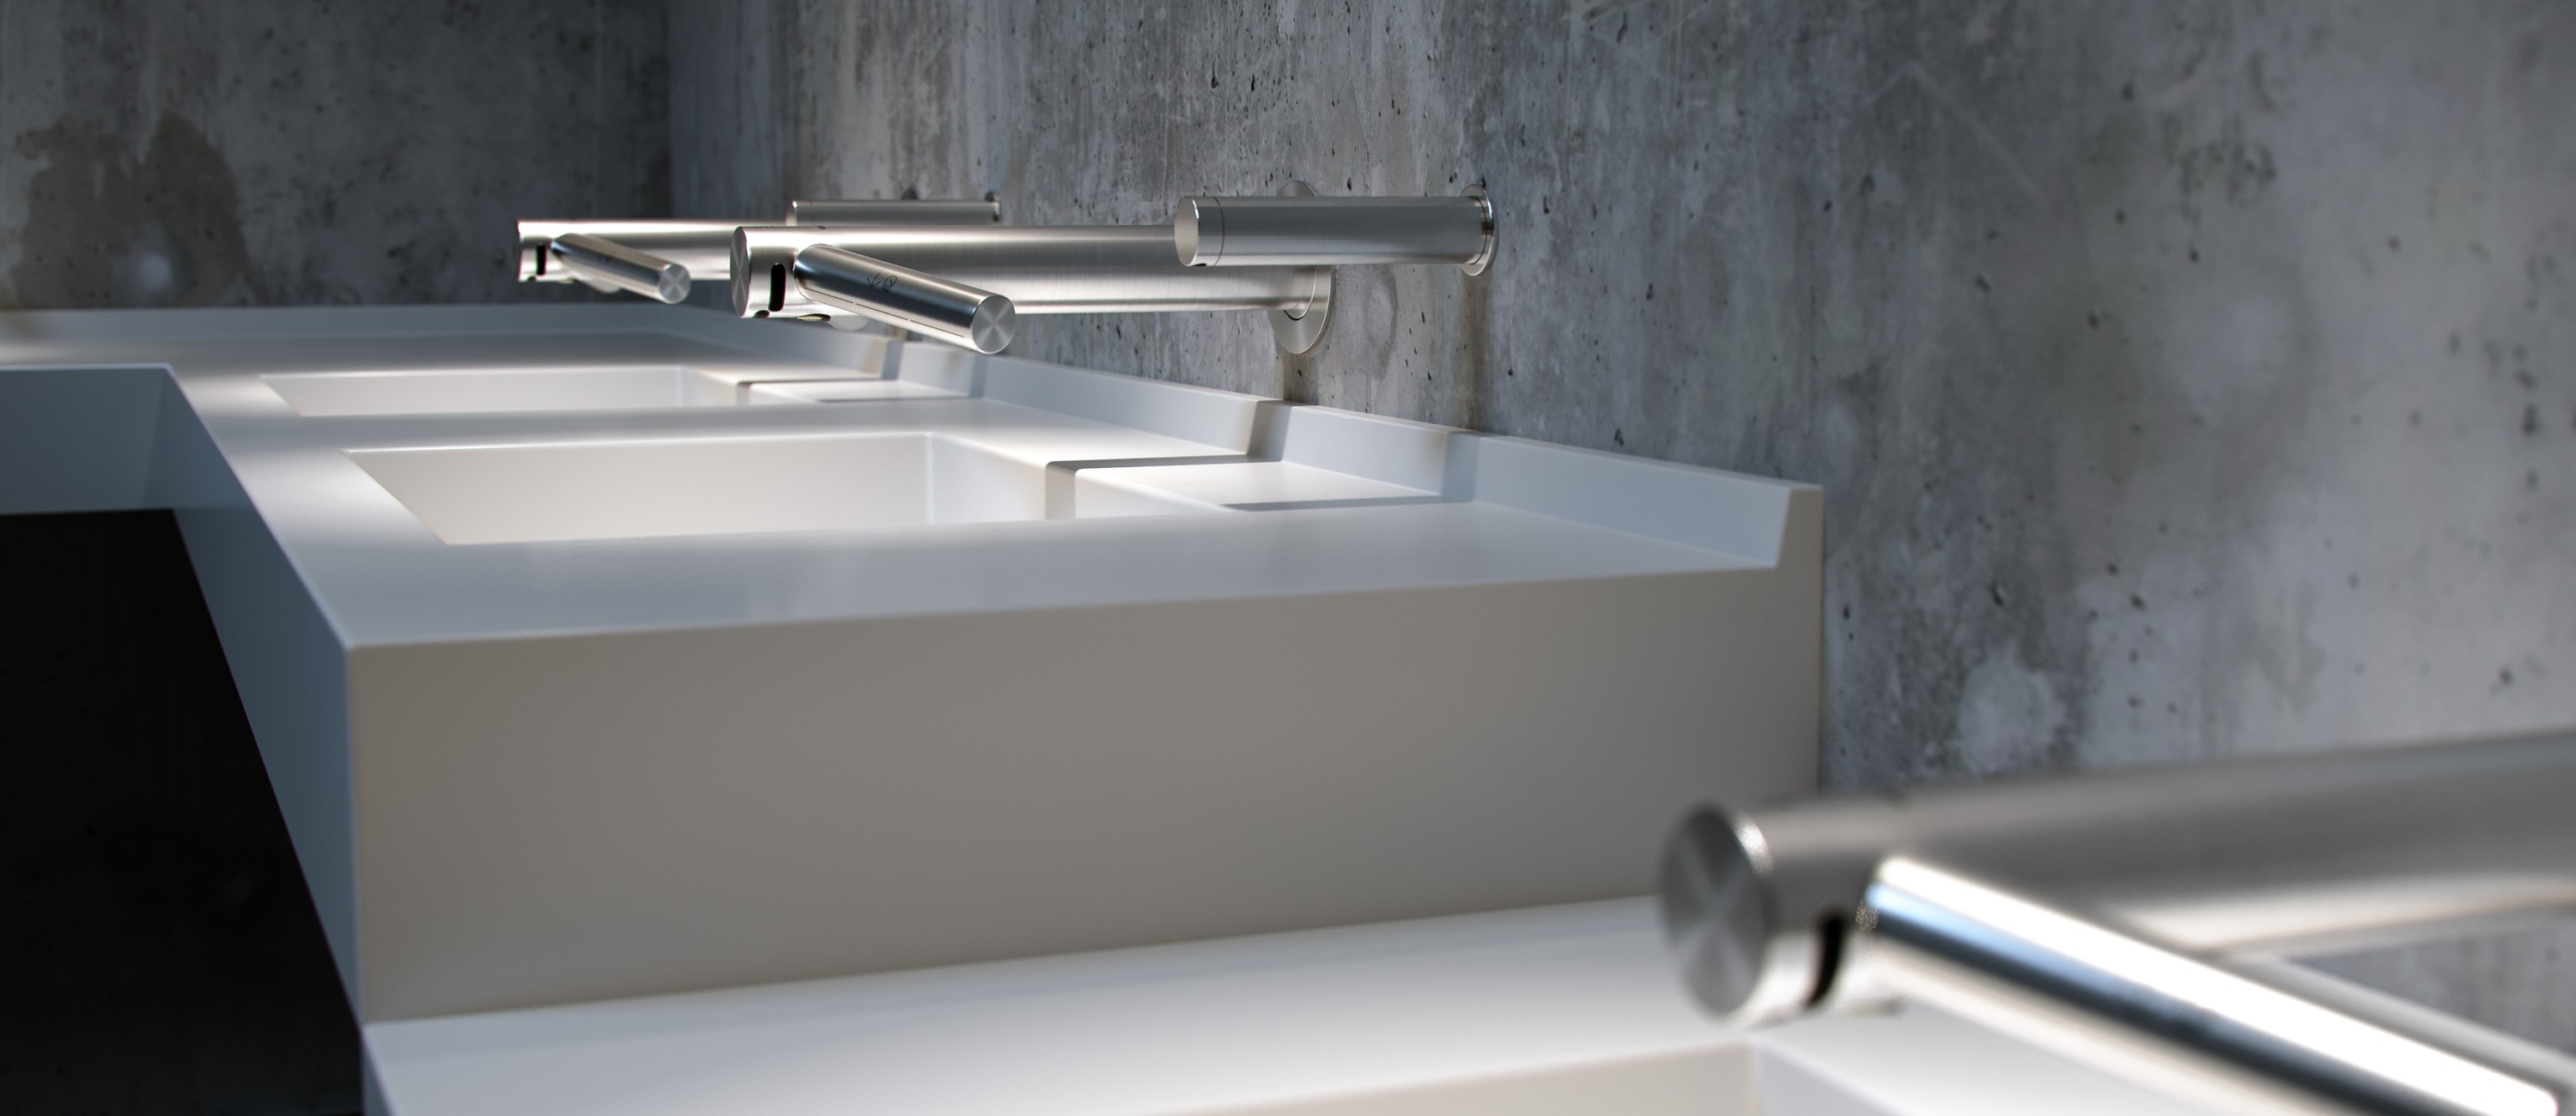 An image of a Washbasin with 3 Dyson Airblade Hand Dryer Model WD04 